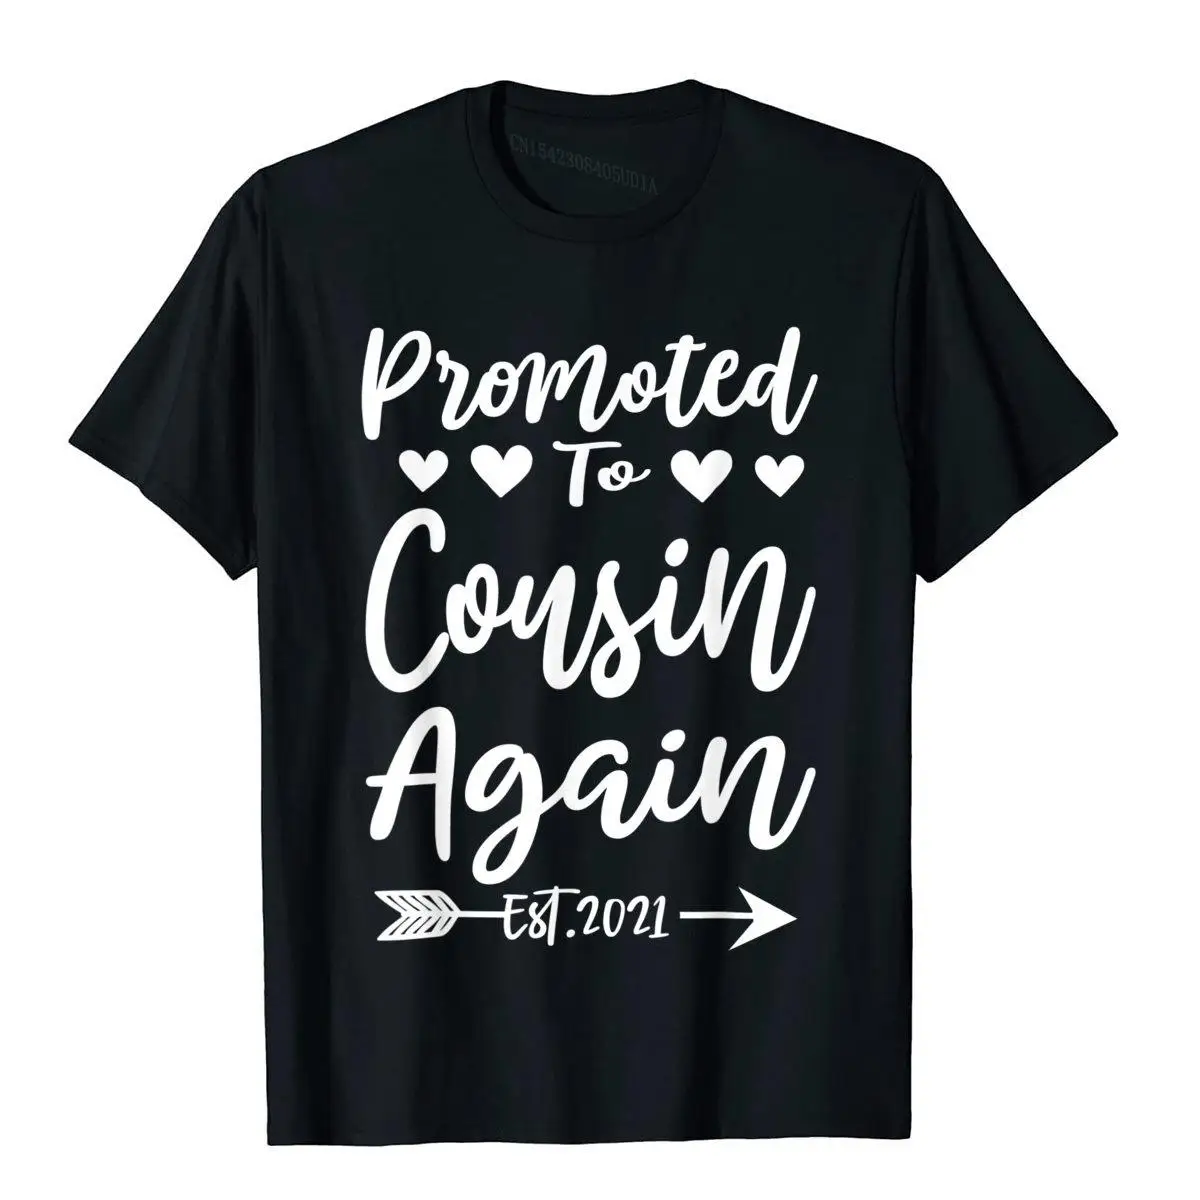 

Promoted To Cousin Again Est 2021 Vintage Gift T-Shirt Cotton Tops T Shirt For Men Camisas Hombre T Shirts Cool Fashion